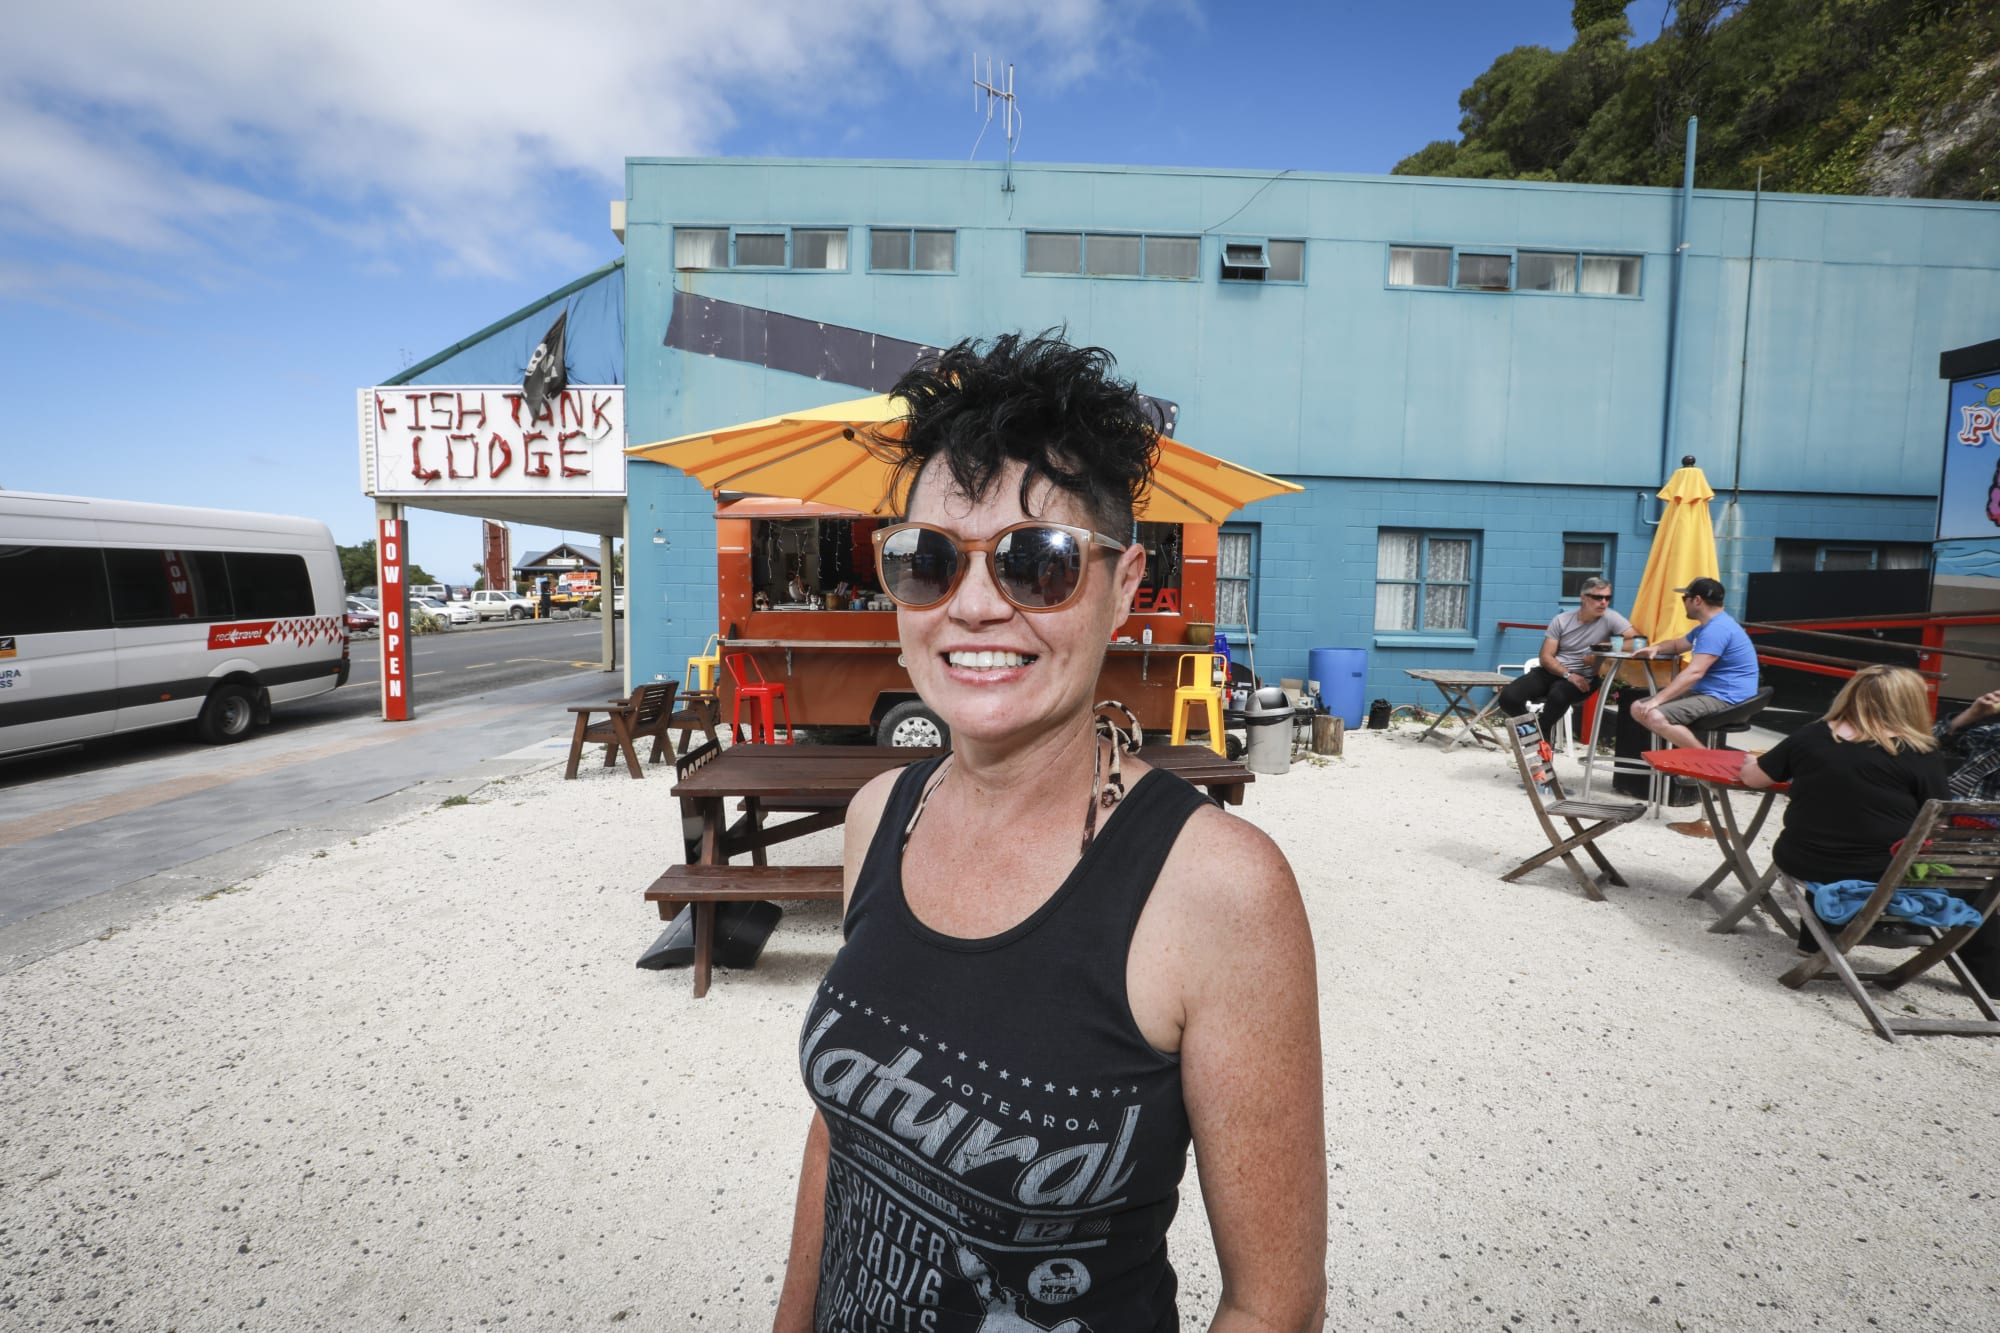 Sharon Rayner, owner/operator of The Cafe Cart in Kaikoura. Sharon and her team were a hub for residents, tourists and recovery crew during the aftermath of the quake.